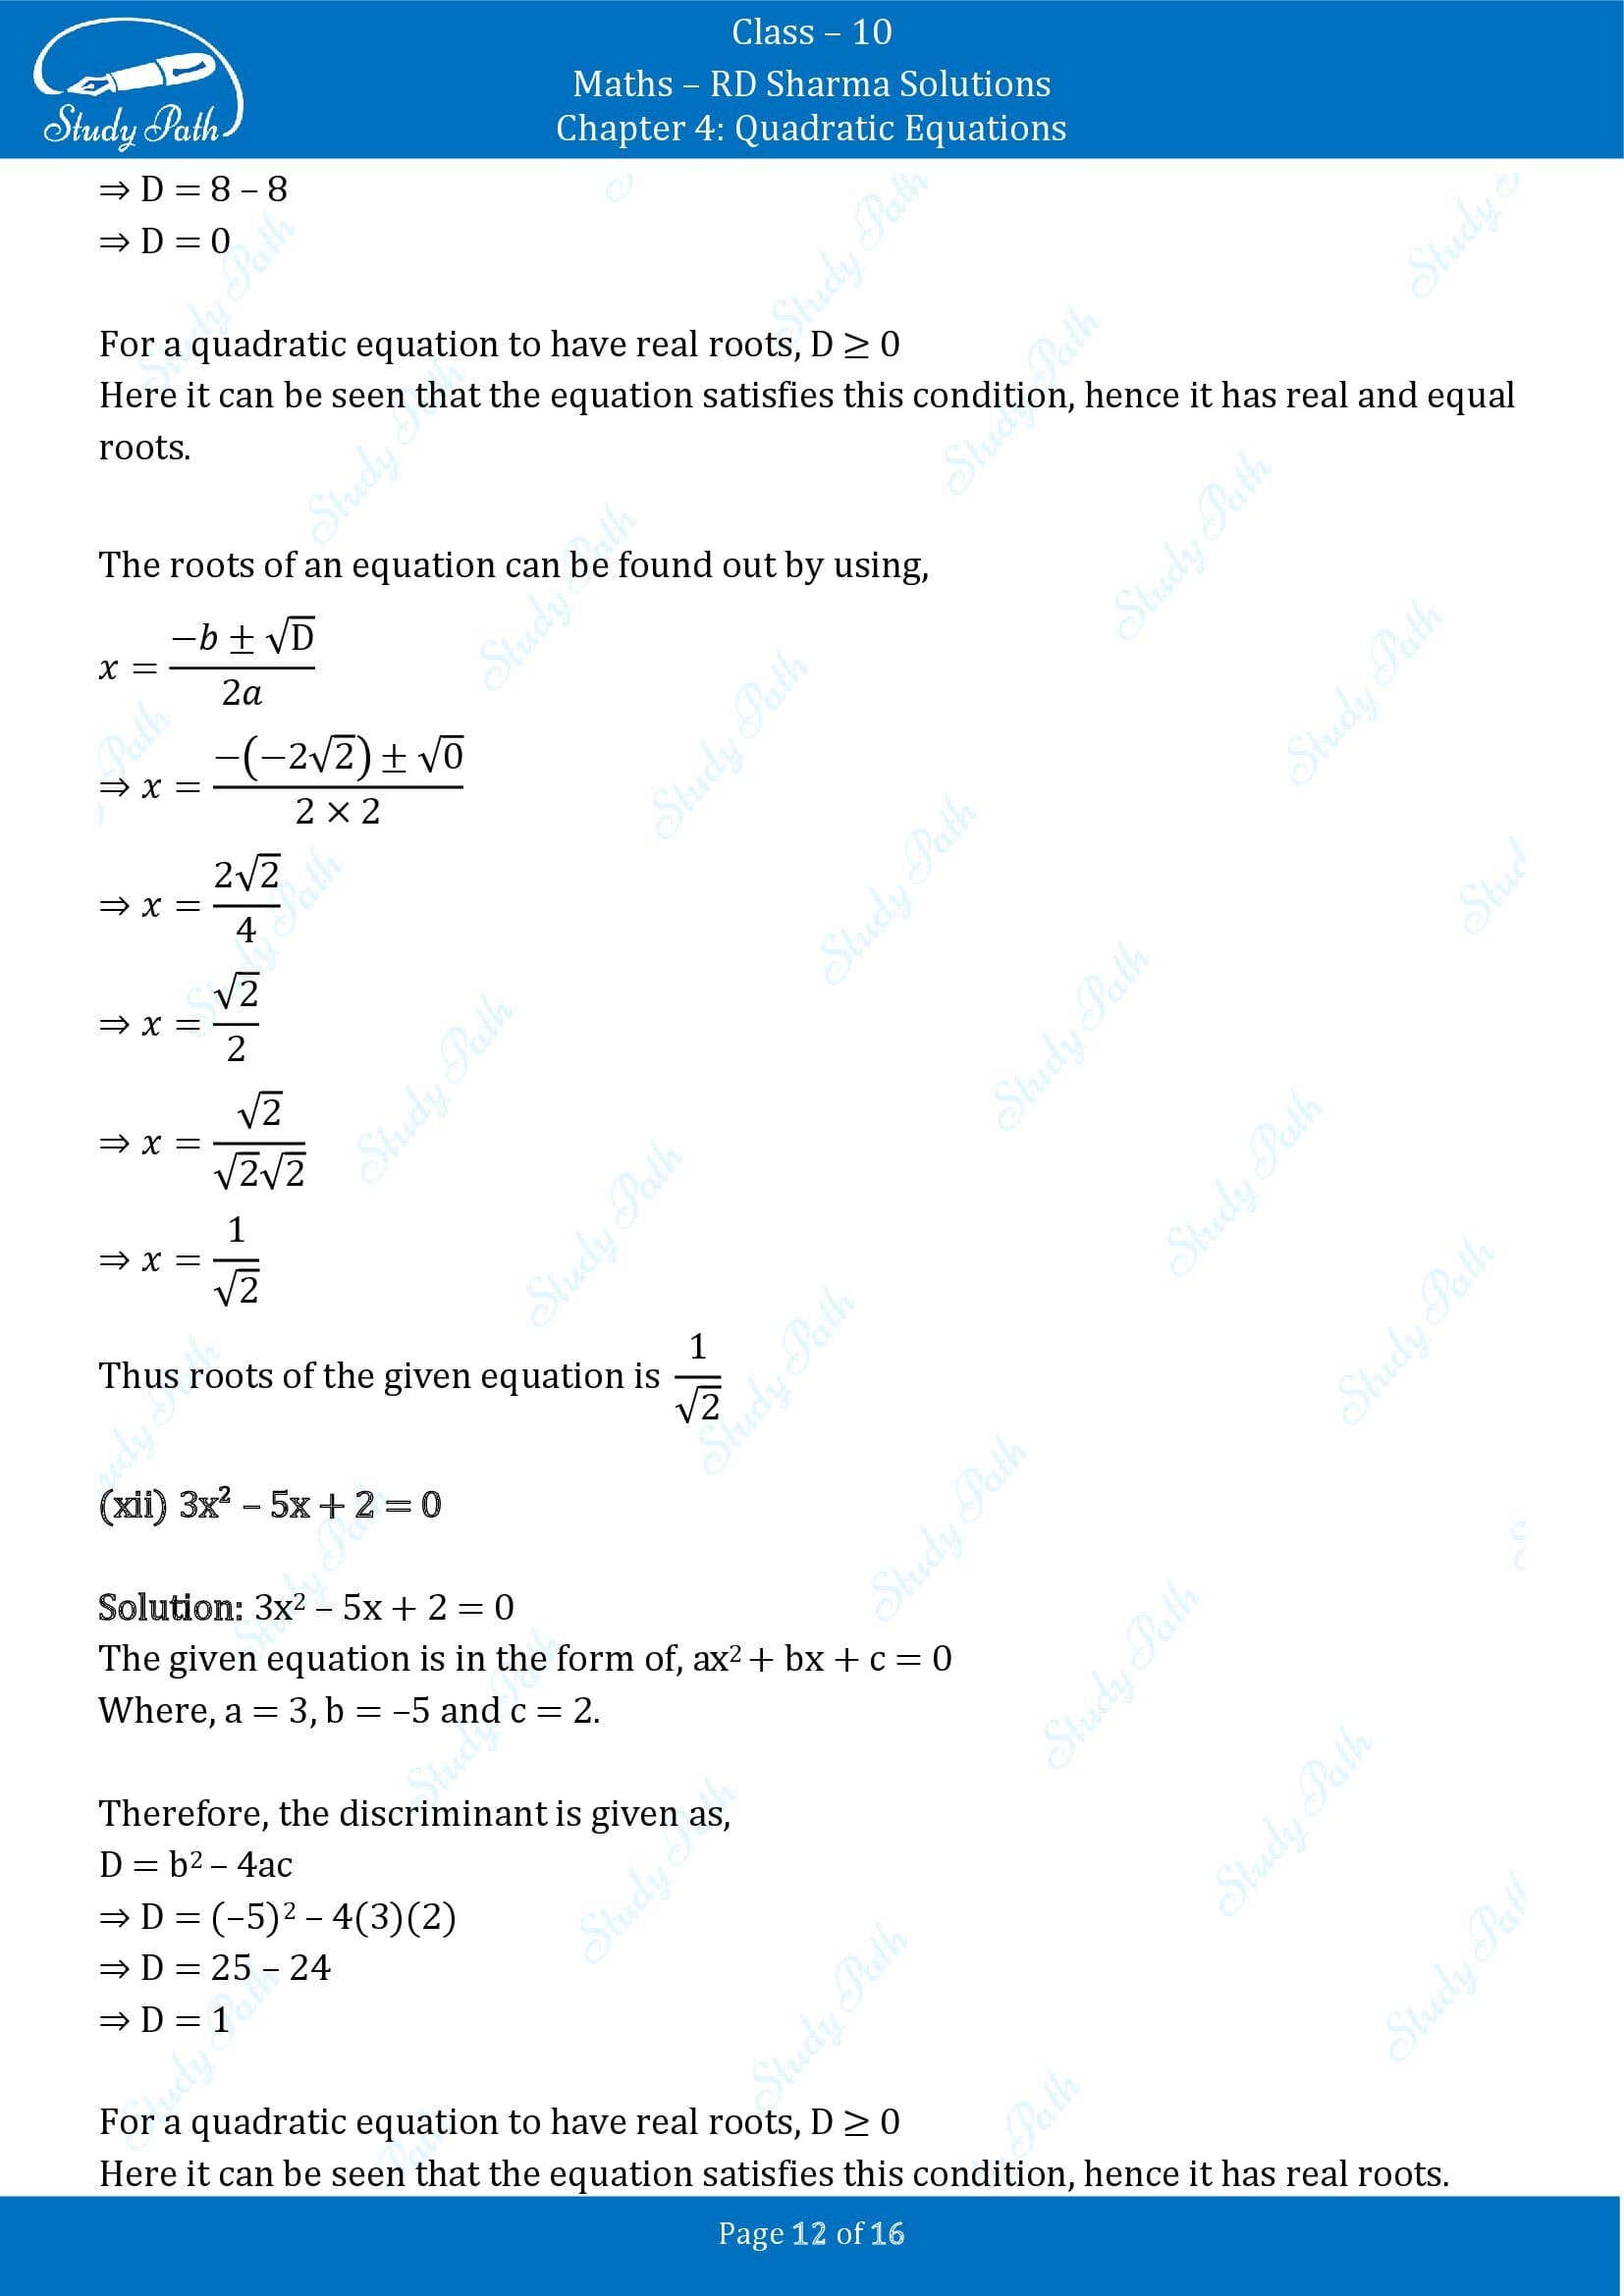 RD Sharma Solutions Class 10 Chapter 4 Quadratic Equations Exercise 4.5 00012